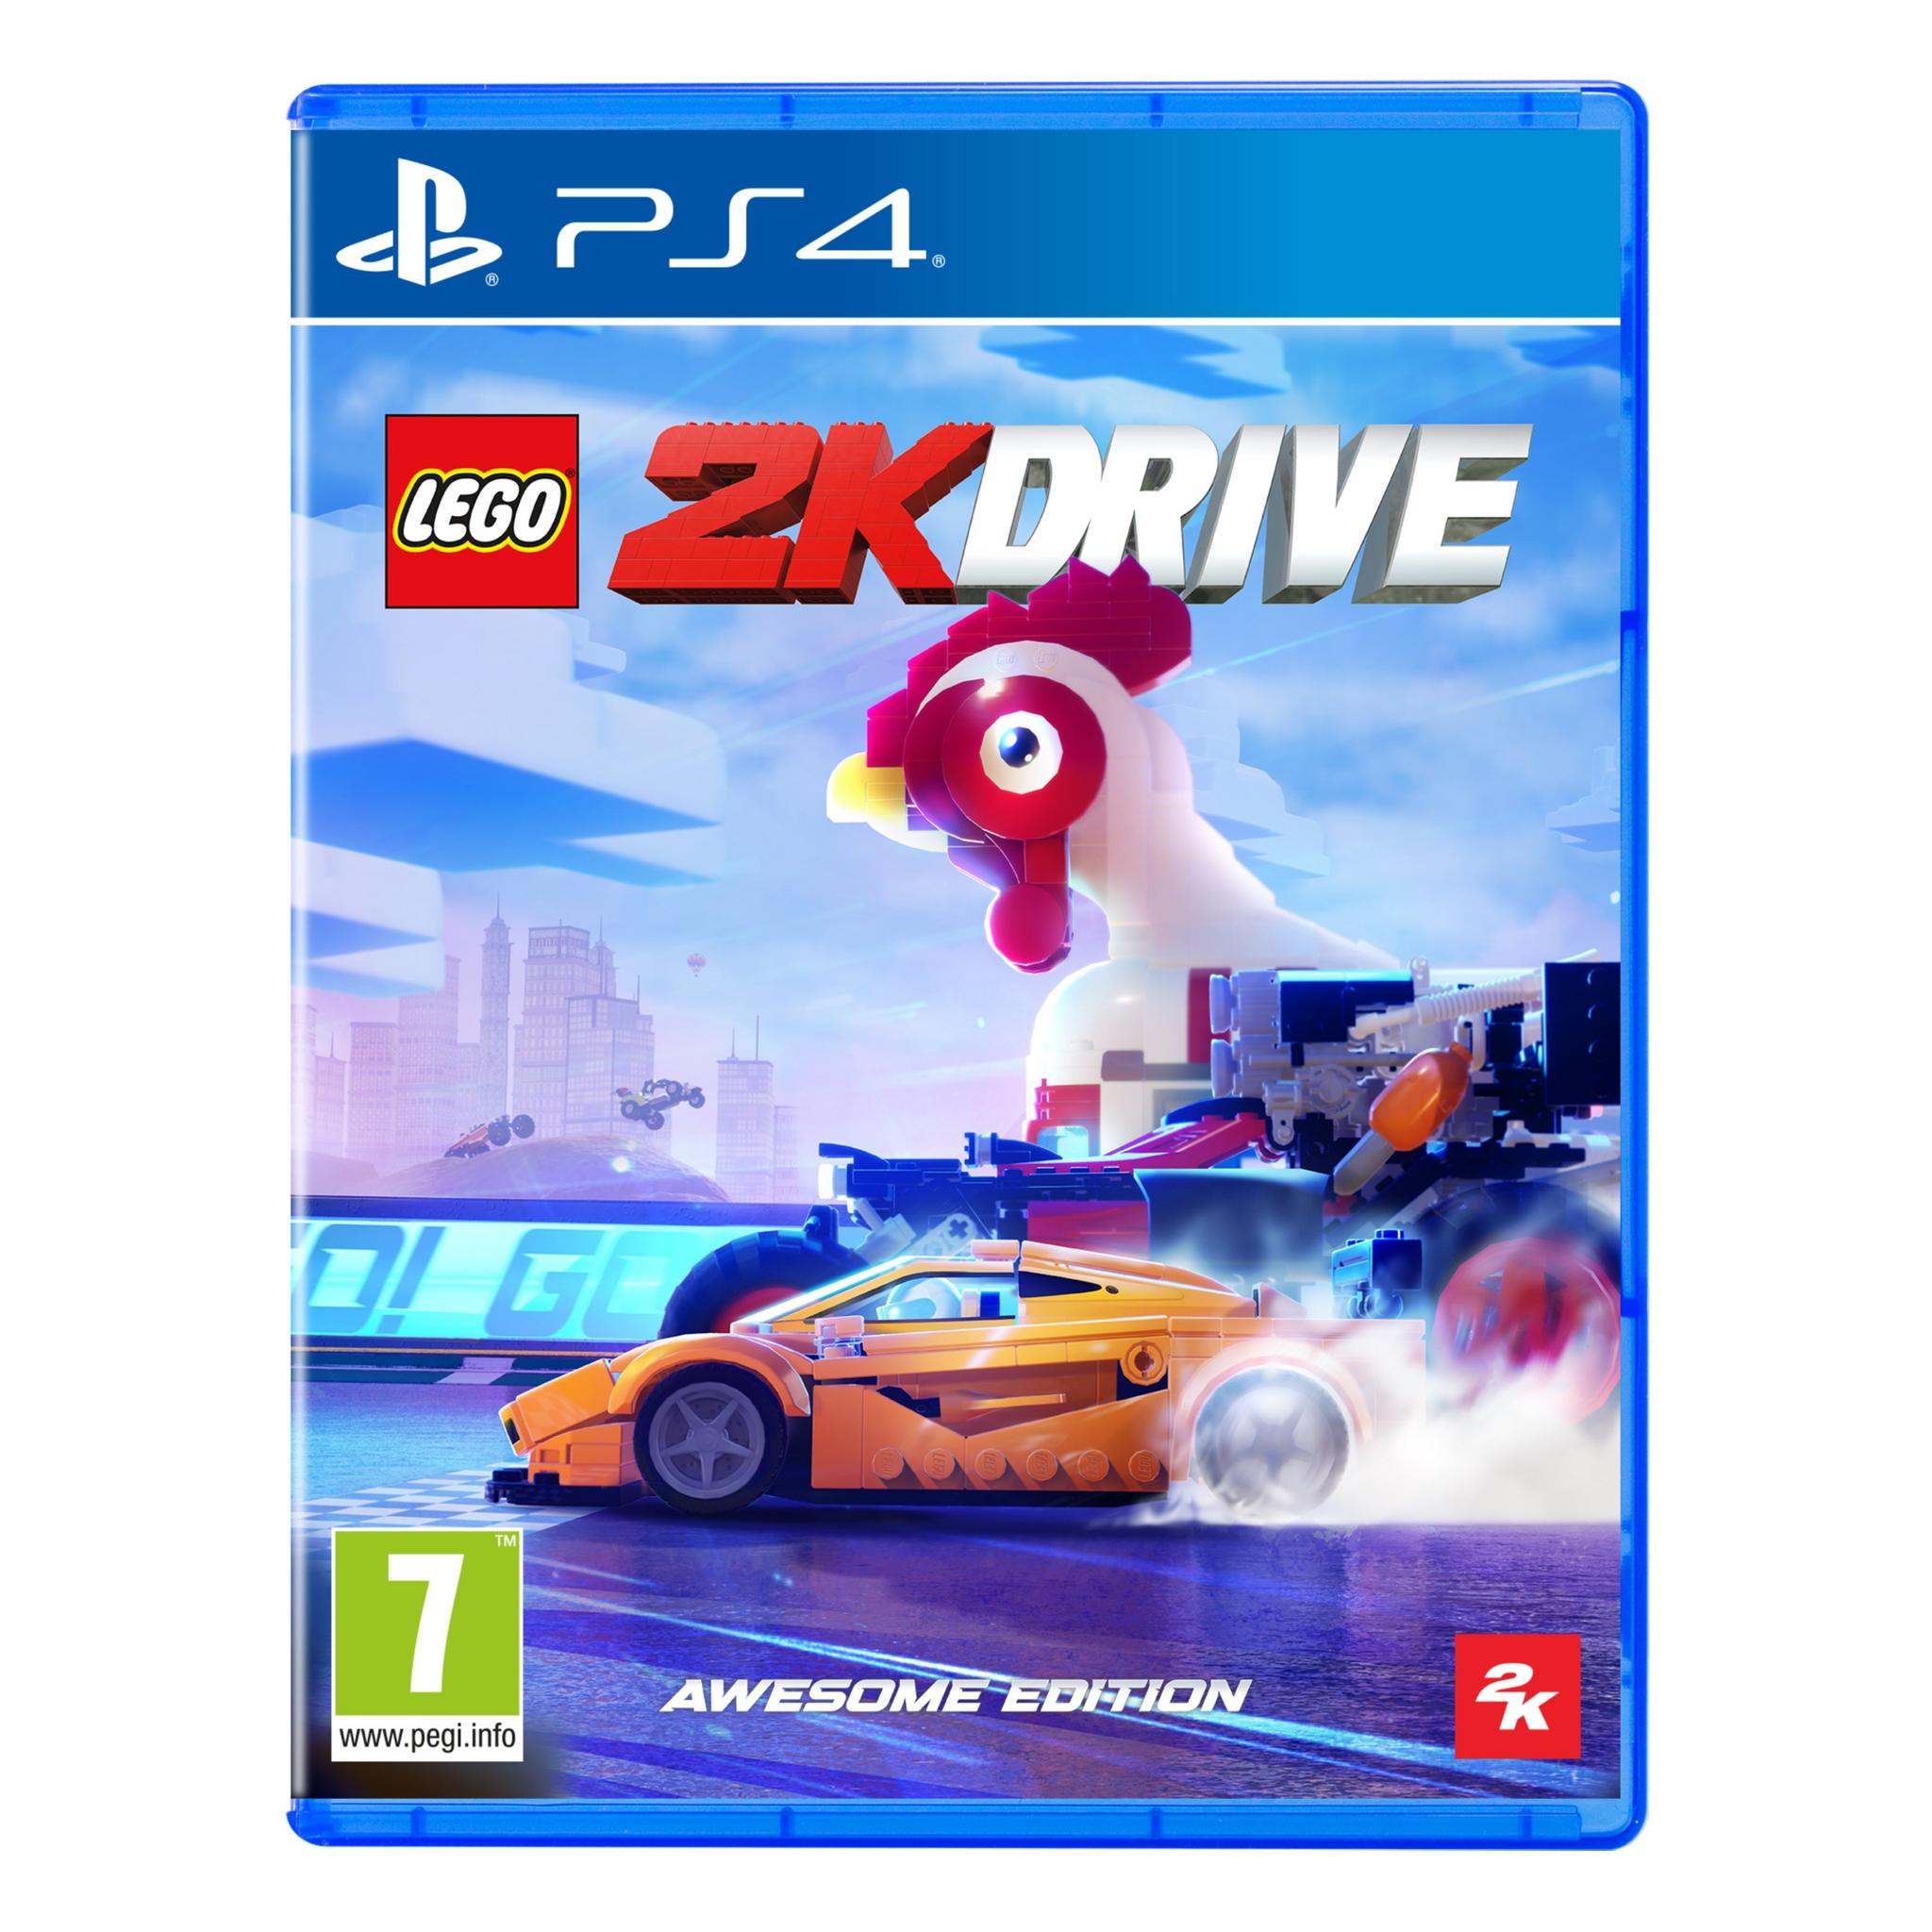 Lego 2K Drive - Awesome Edition - PlayStation 4 Game